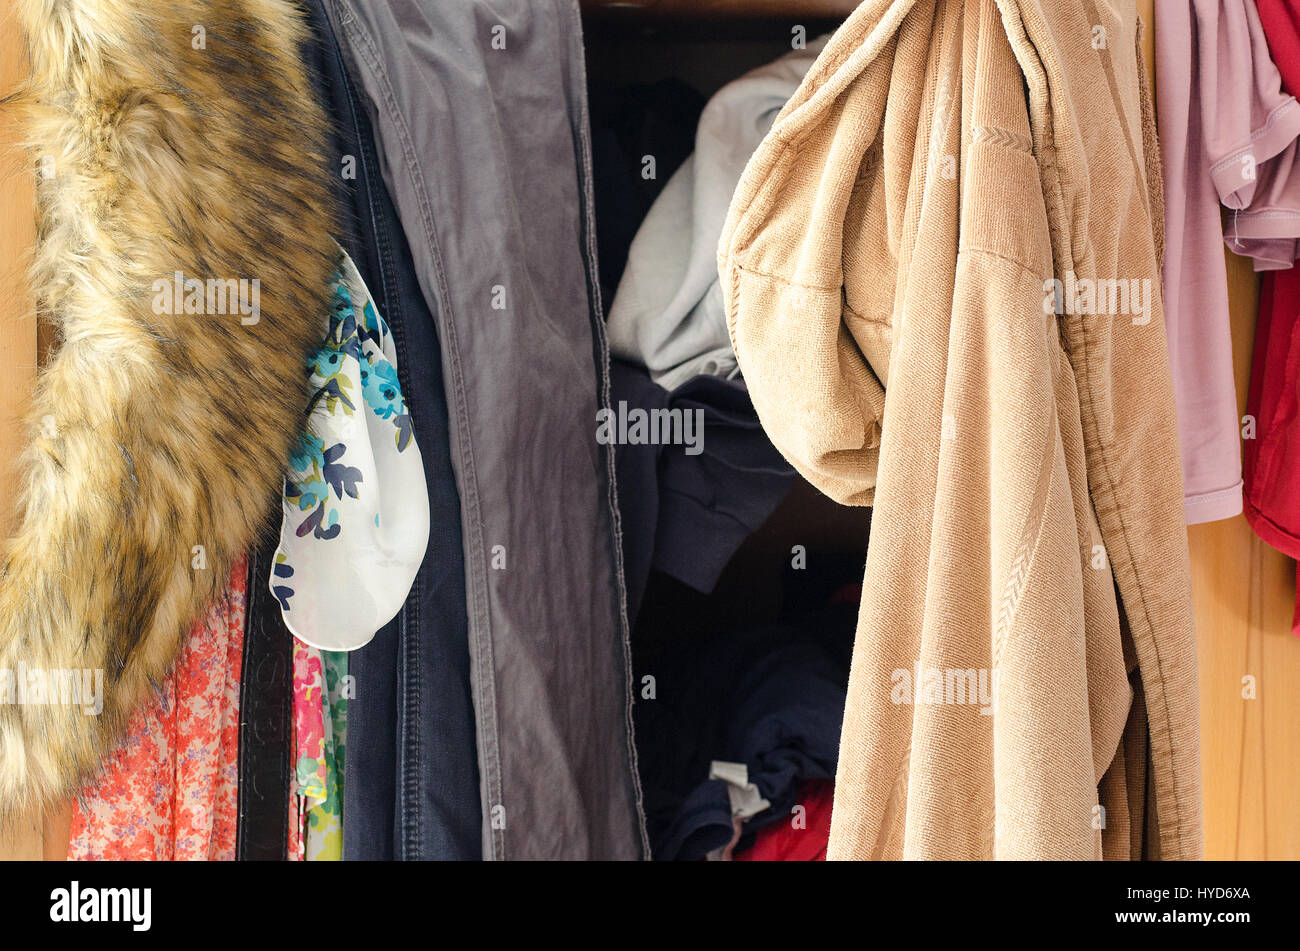 Pile of carelessly scattered clothes in wardrobe Stock Photo